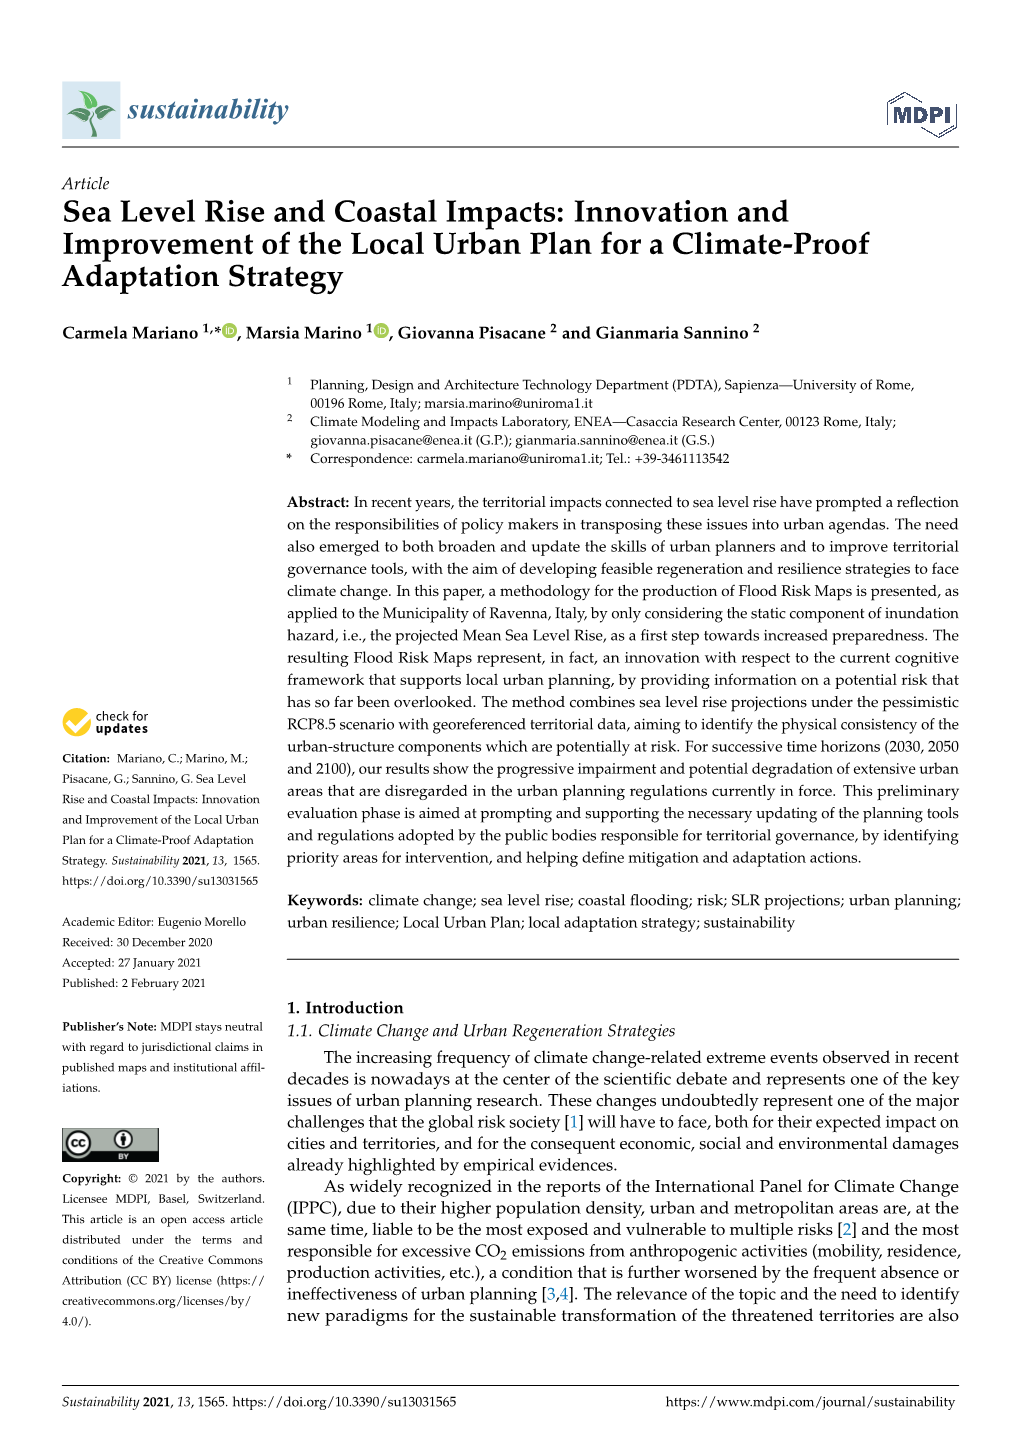 Sea Level Rise and Coastal Impacts: Innovation and Improvement of the Local Urban Plan for a Climate-Proof Adaptation Strategy